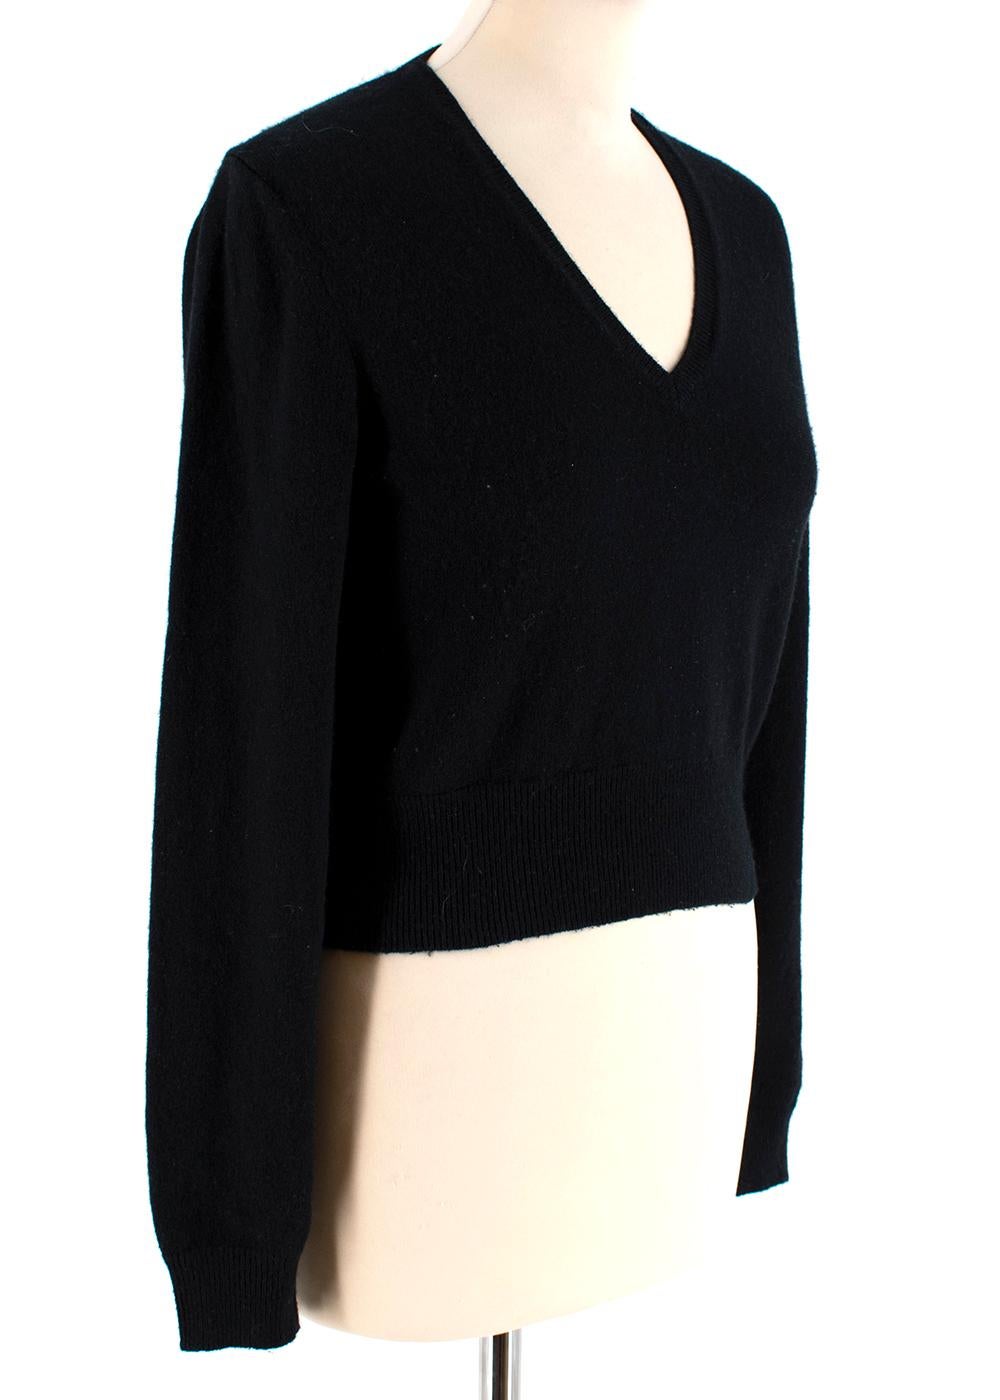 Bottega Veneta Black V-Neck Jumper

- Lightweight knit
- V-neck, long sleeves
- Ribbed knit neckline, cuffs, and hem
- Cropped length

Materials:
100% Cashmere

Made in Italy
Dry Clean only

Measurements:
Measurements are taken laying flat, seam to